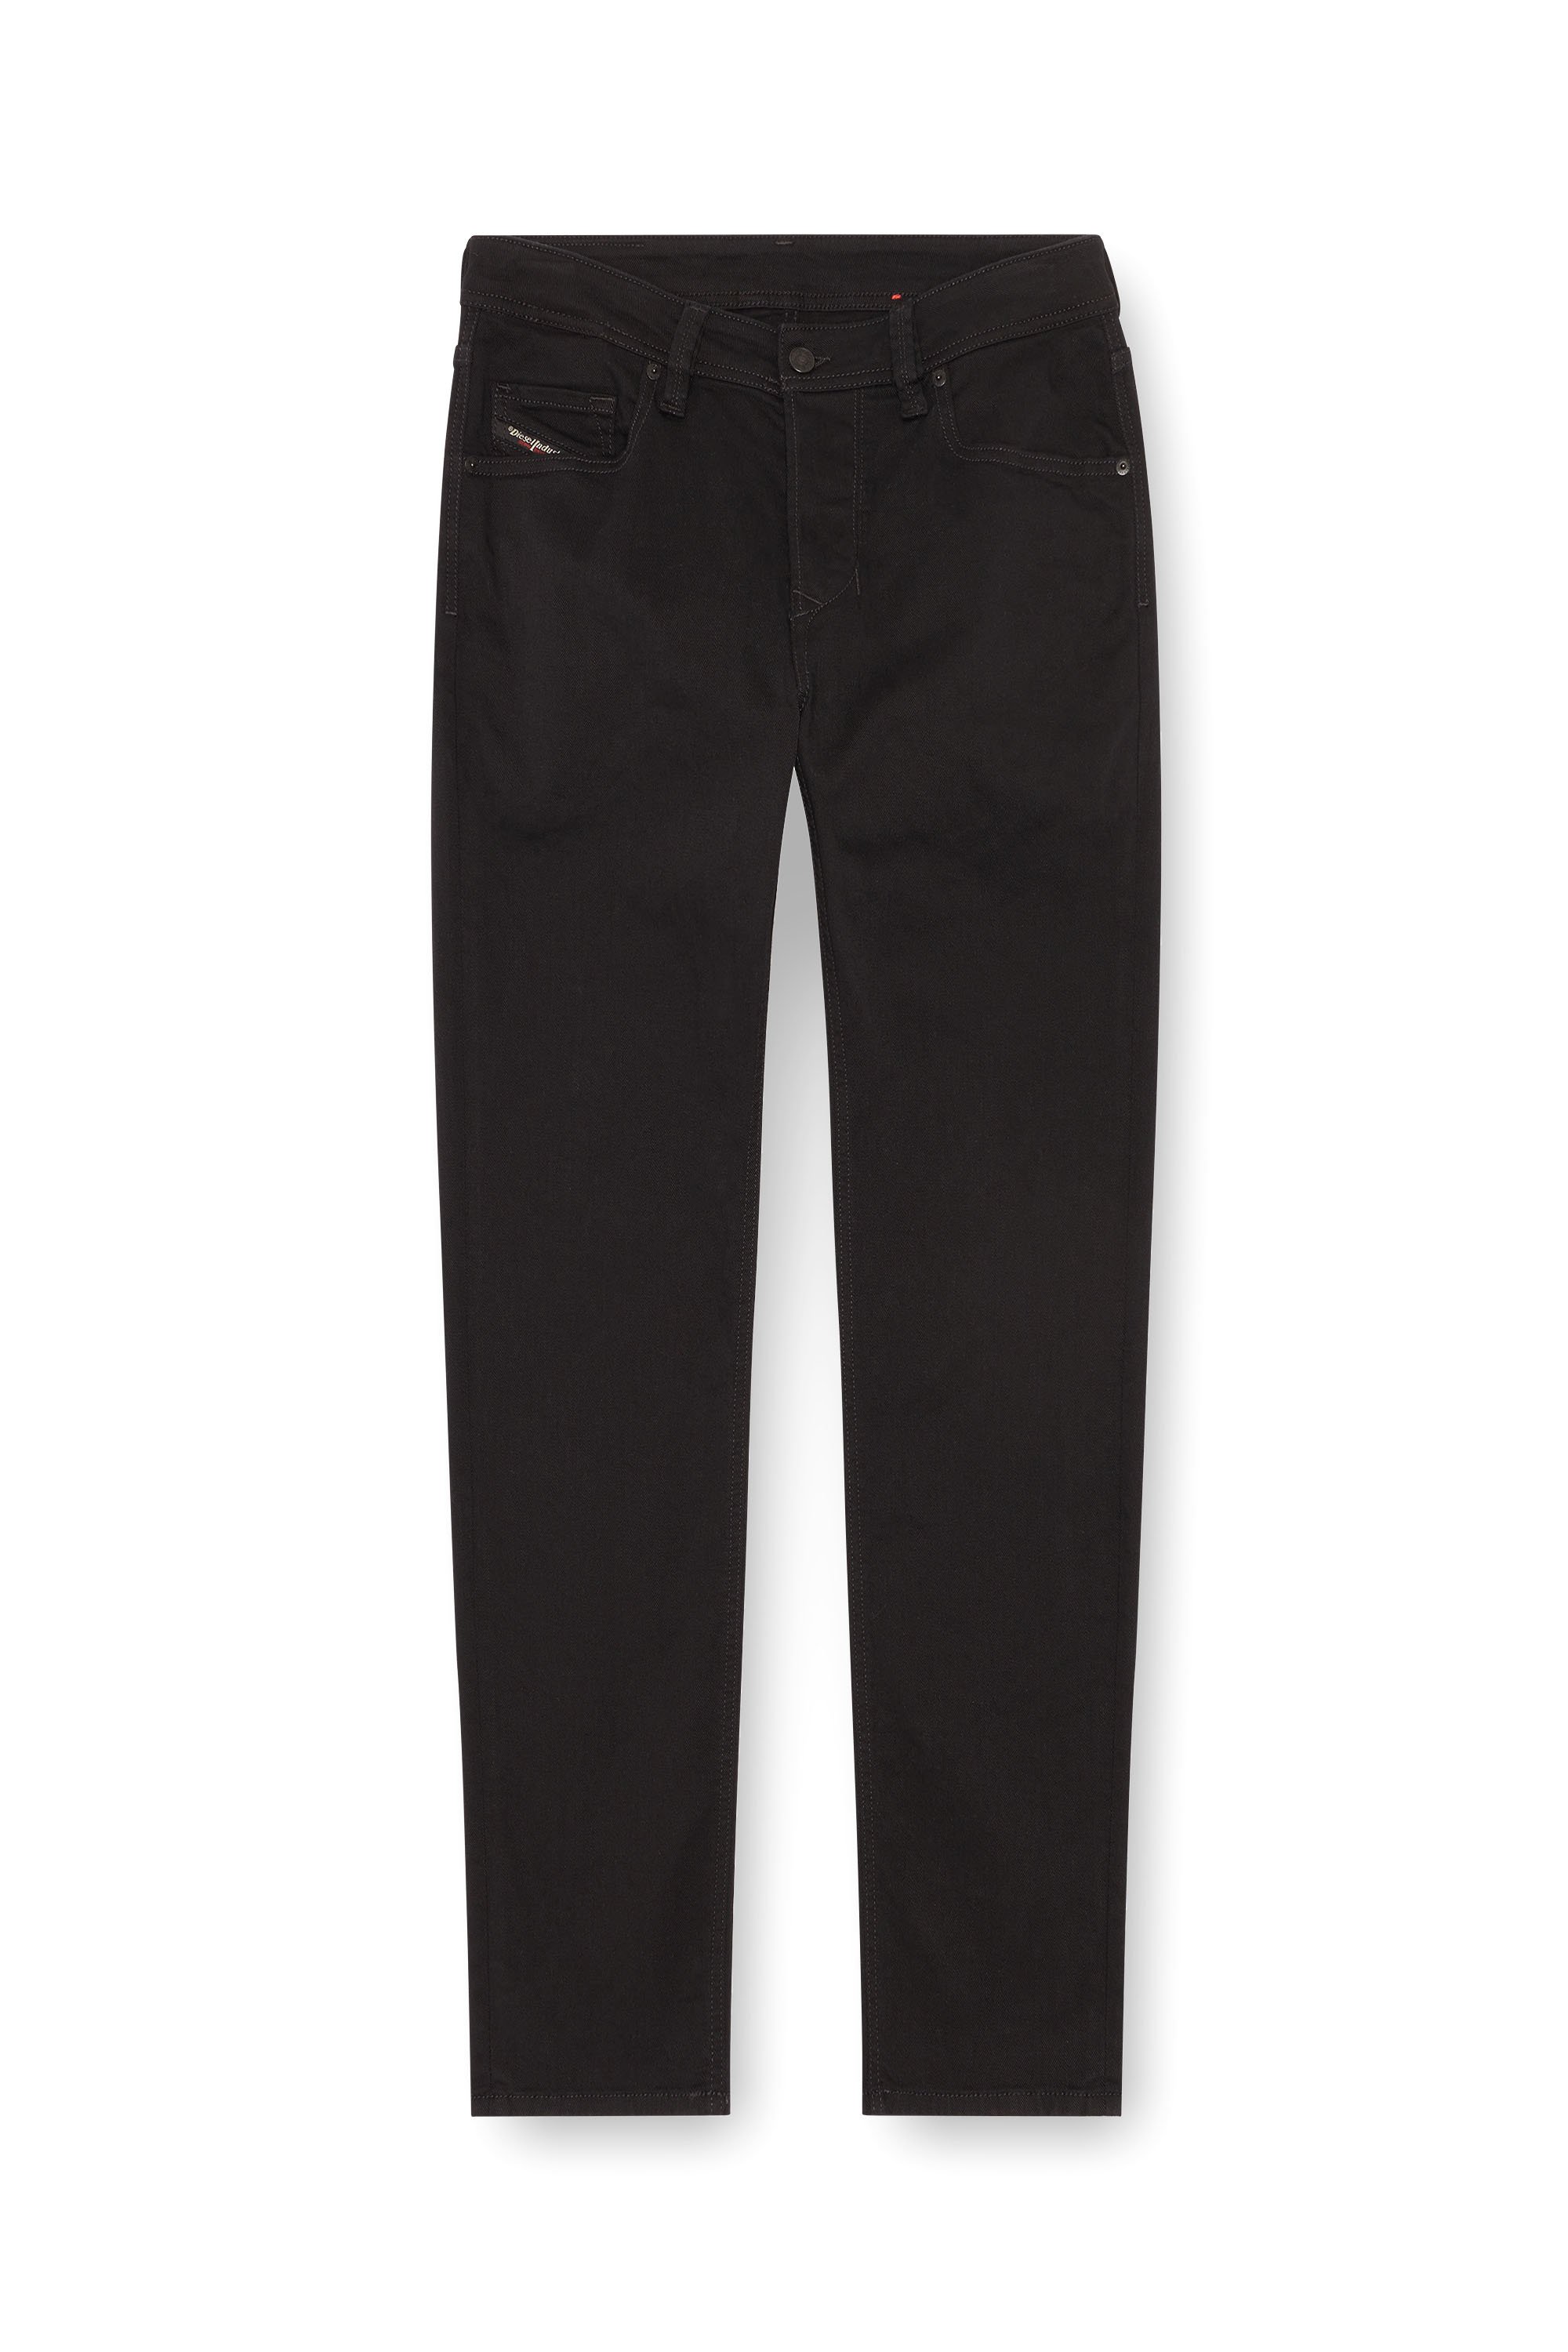 Diesel - Tapered Jeans 1986 Larkee-Beex 0688H, Hombre Tapered Jeans - 1986 Larkee-Beex in Negro - Image 3